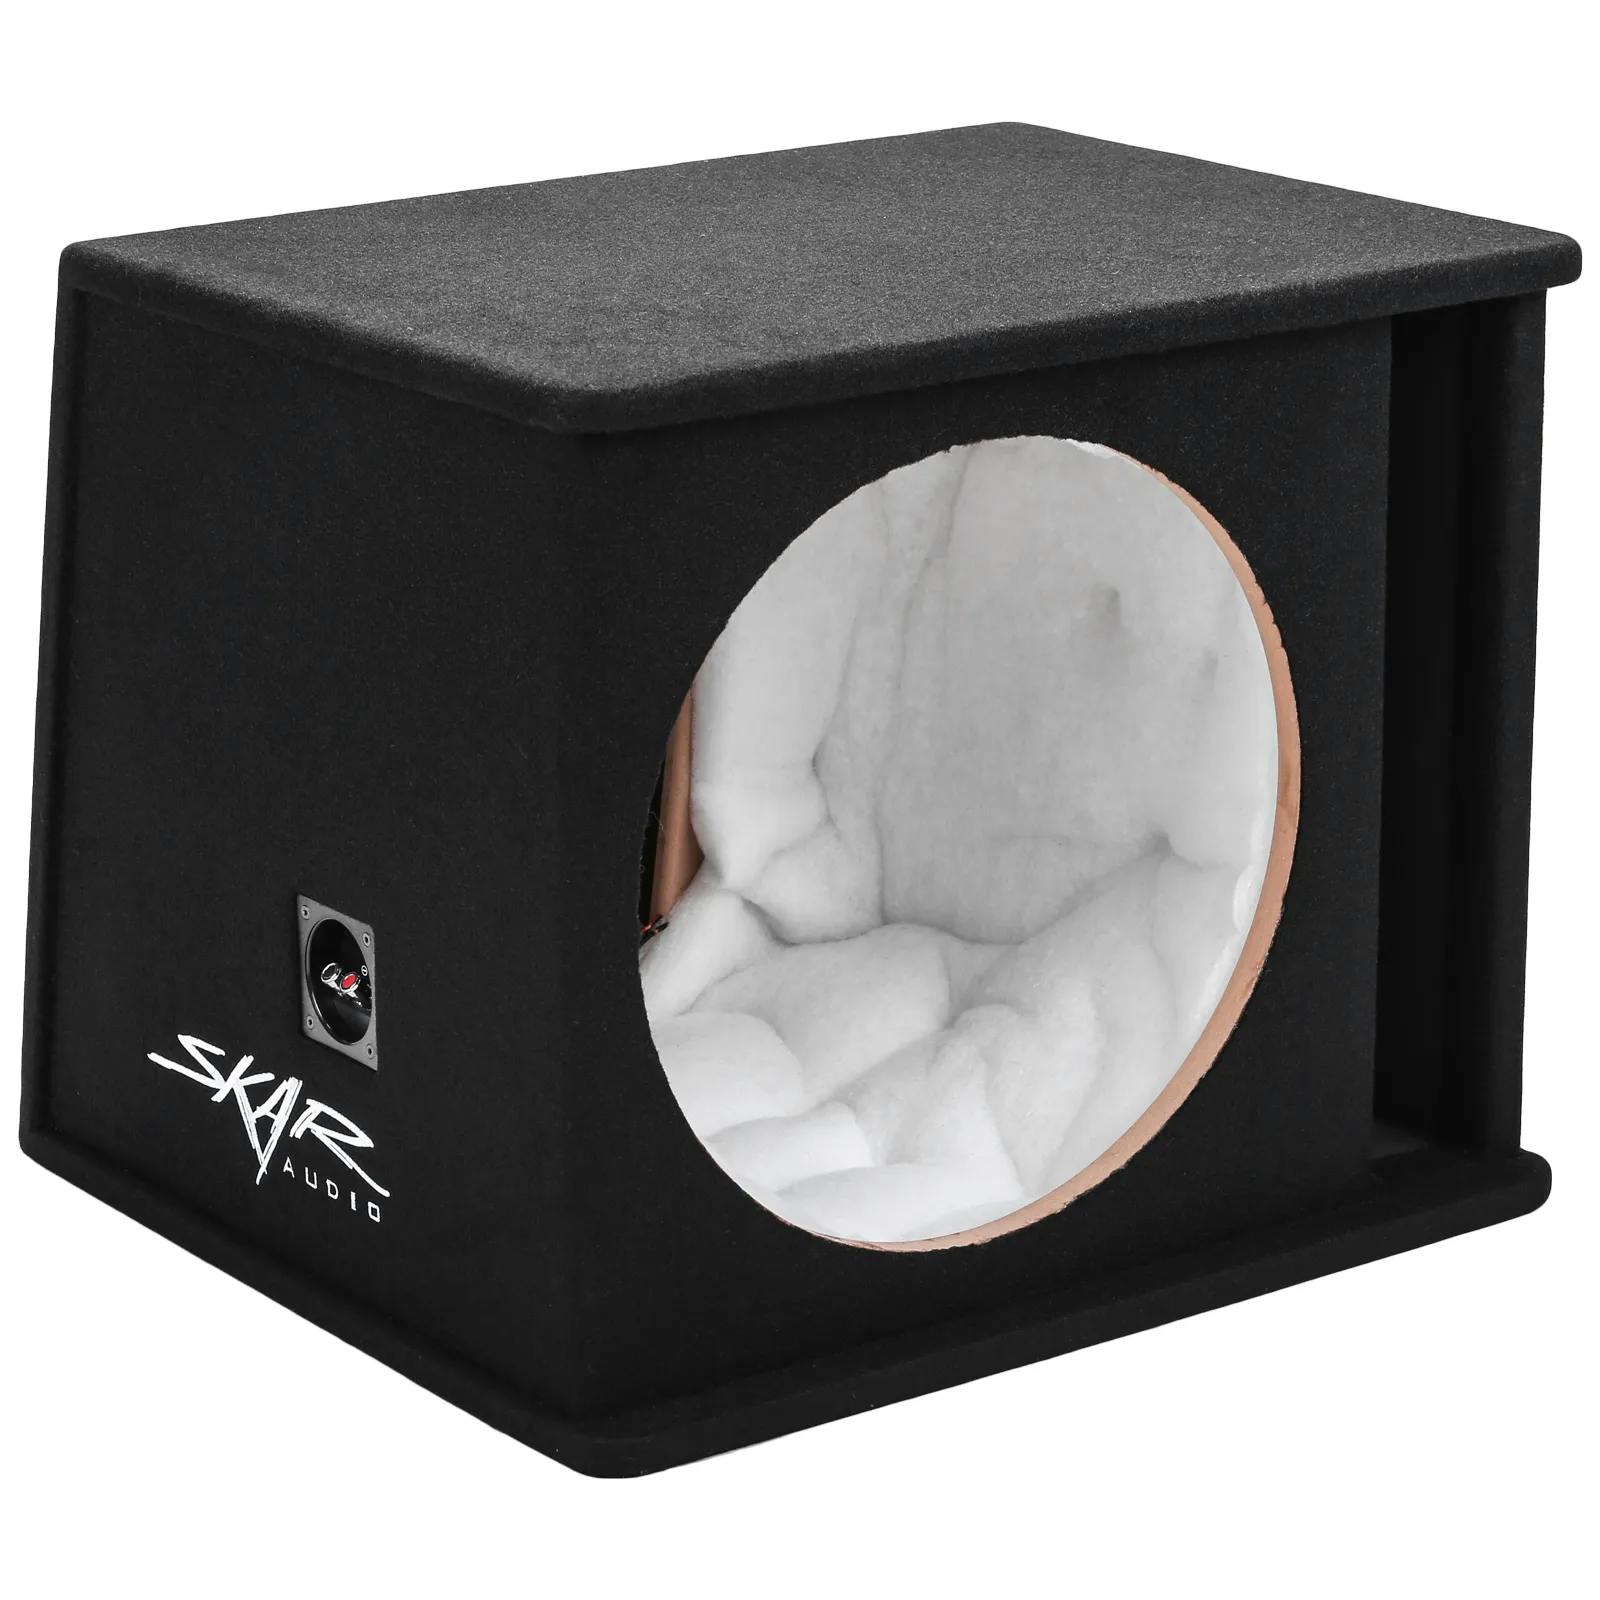 Featured Product Photo for Single 18" Ported Subwoofer Enclosure